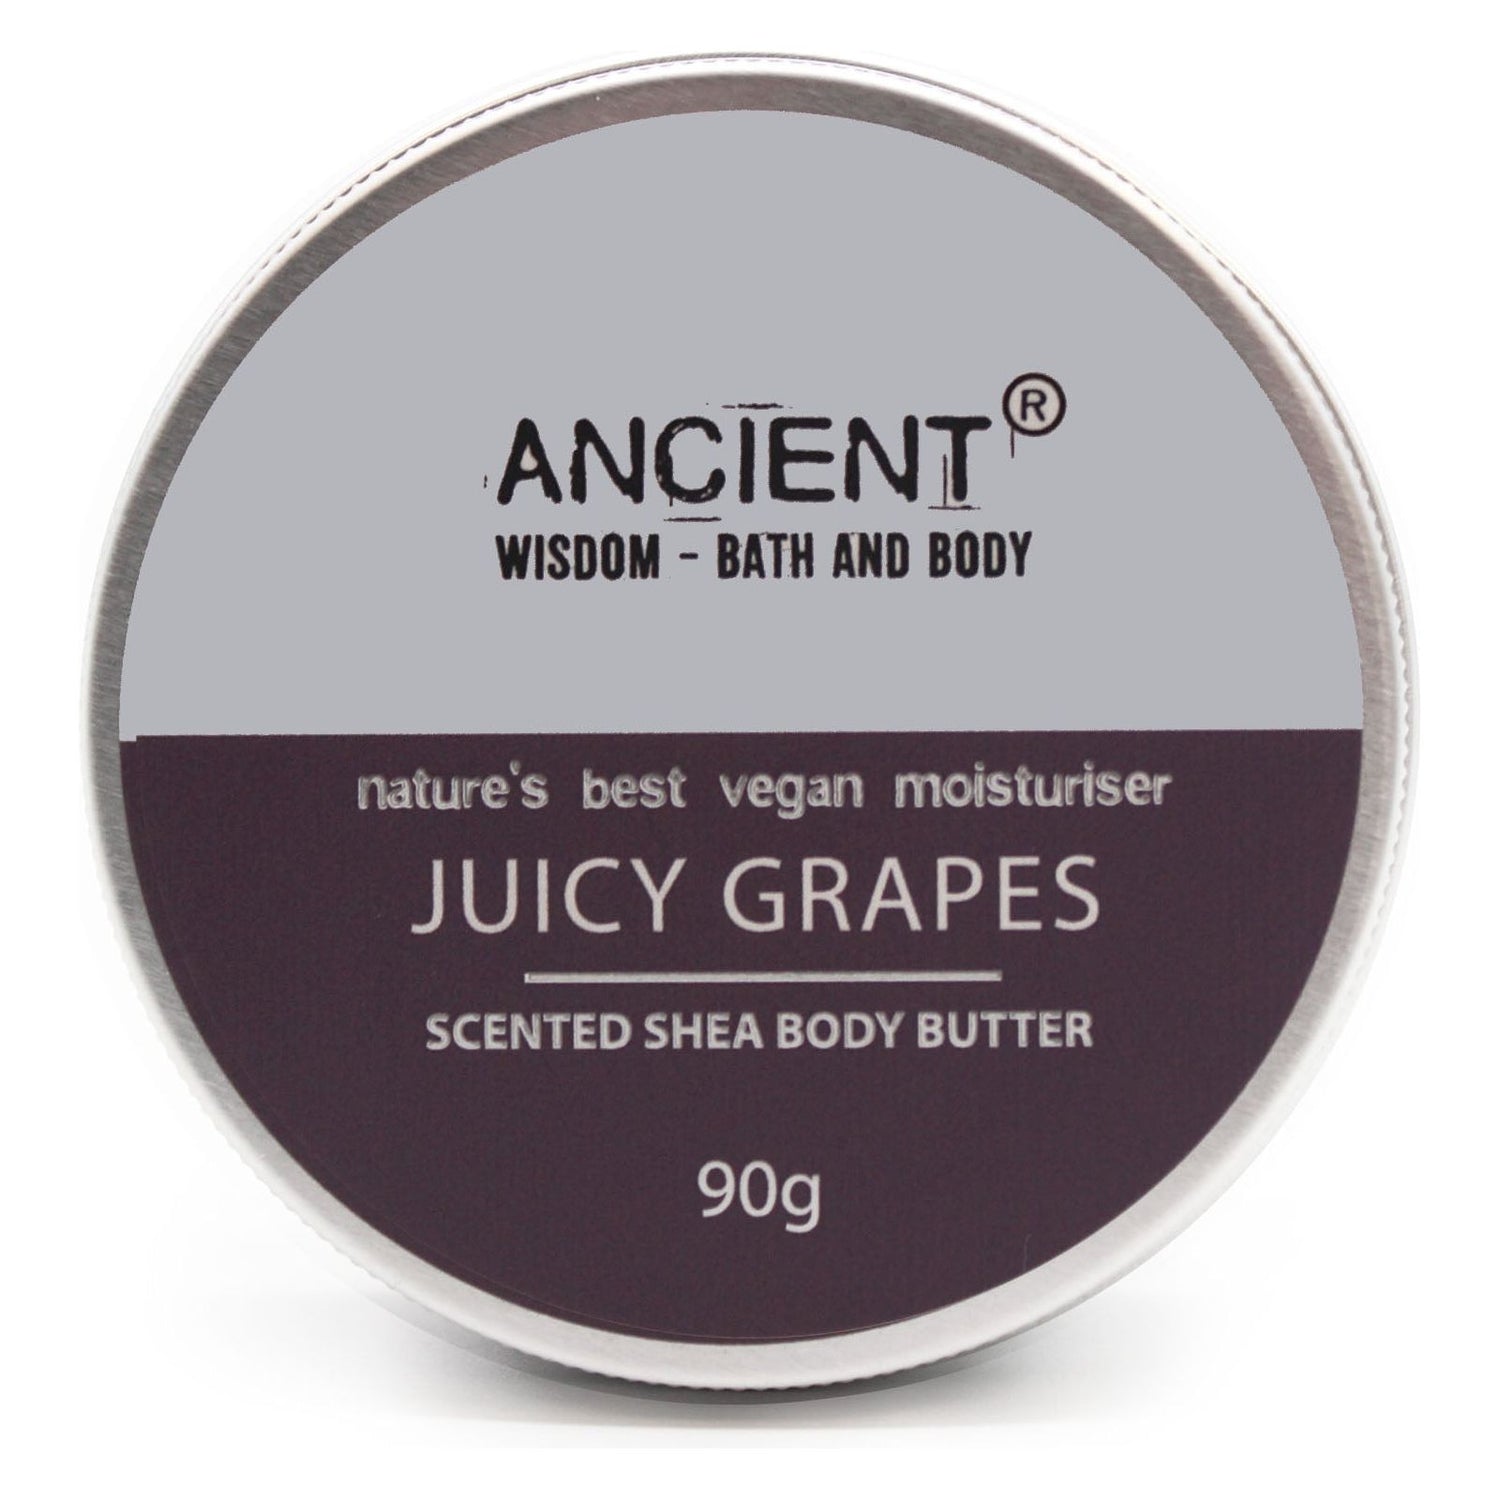 Scented Shea Body Butter 90g - Juicy Grapes - Ashton and Finch